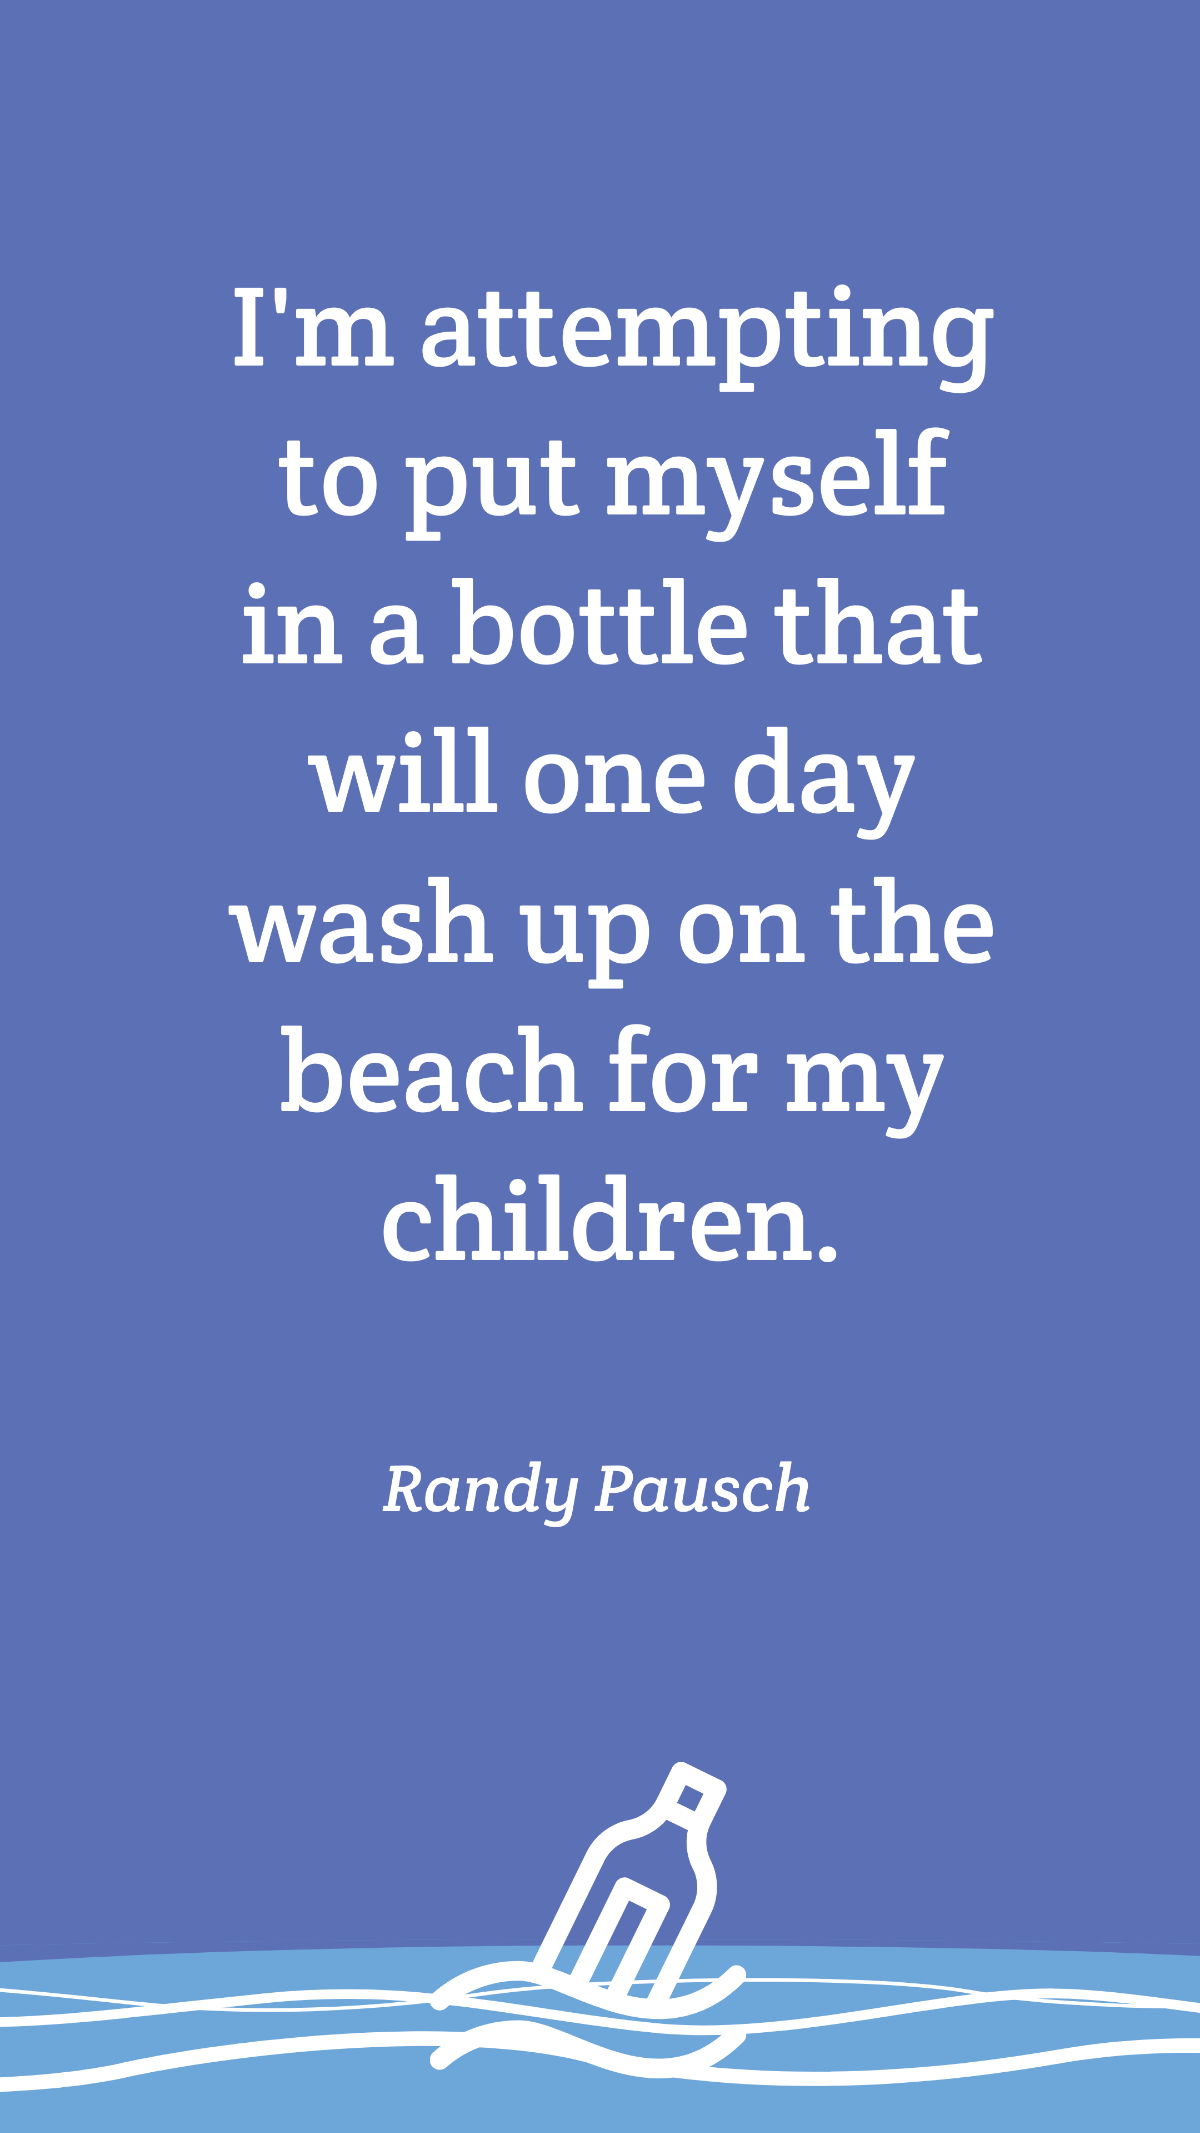 Free Randy Pausch - I'm attempting to put myself in a bottle that will one day wash up on the beach for my children. Template